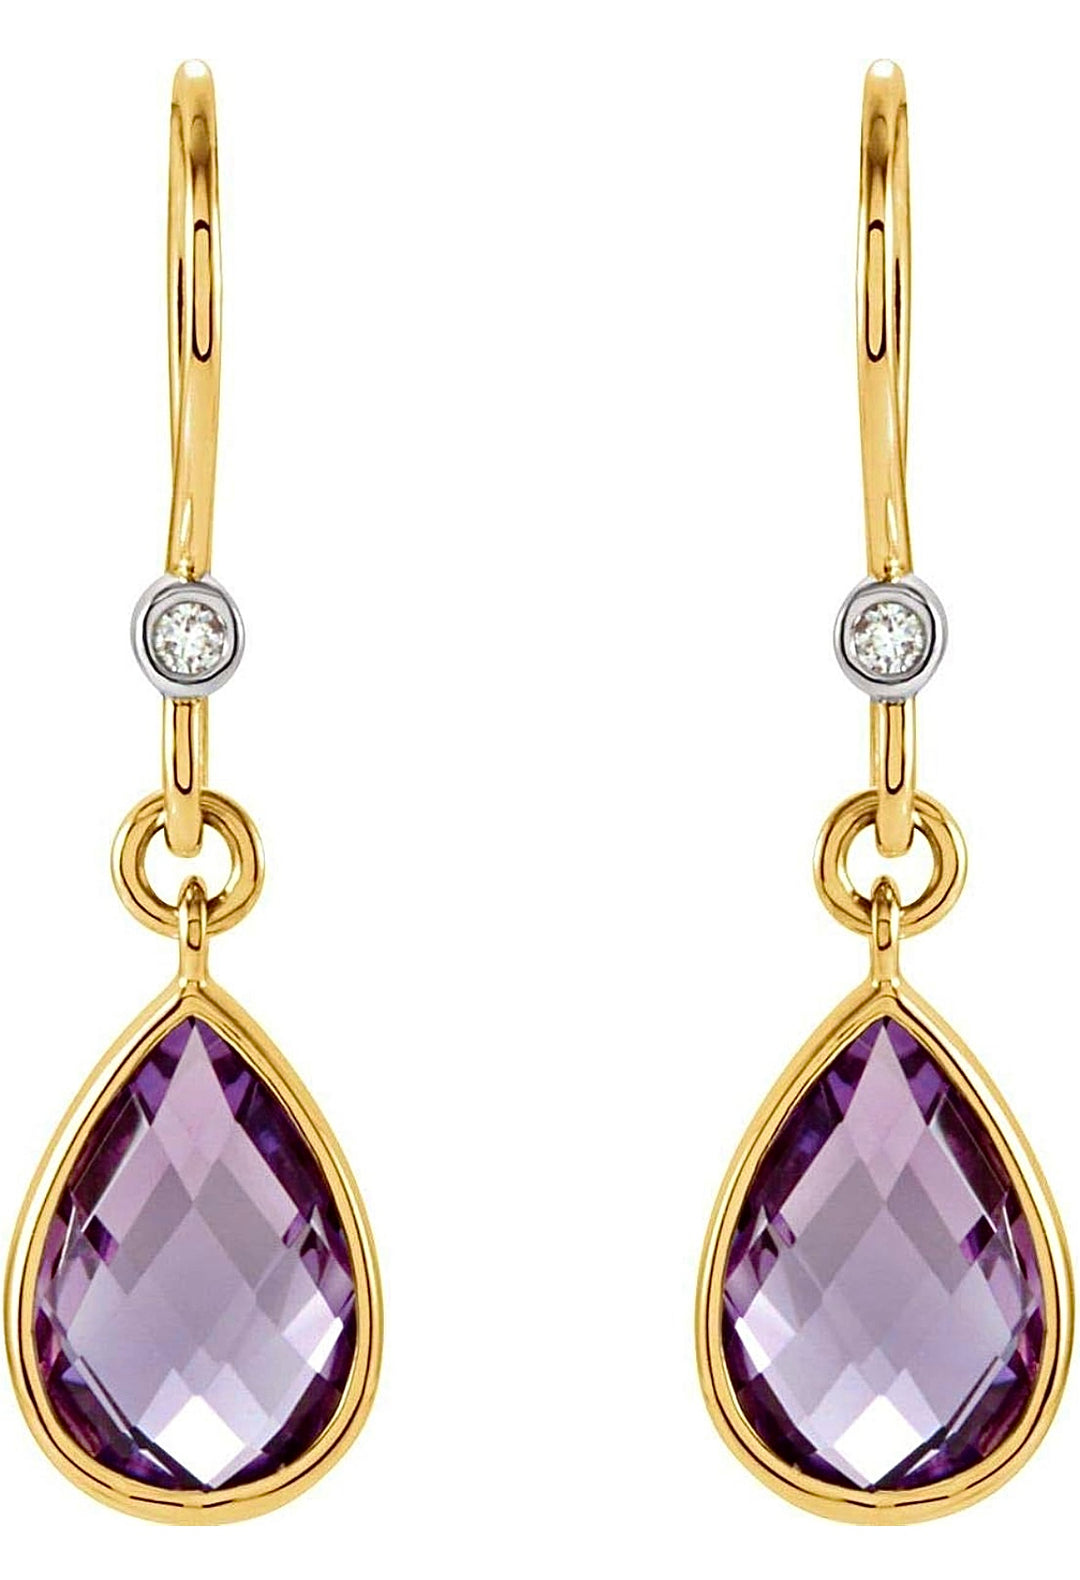 White and Yellow Gold Amethyst Earrings